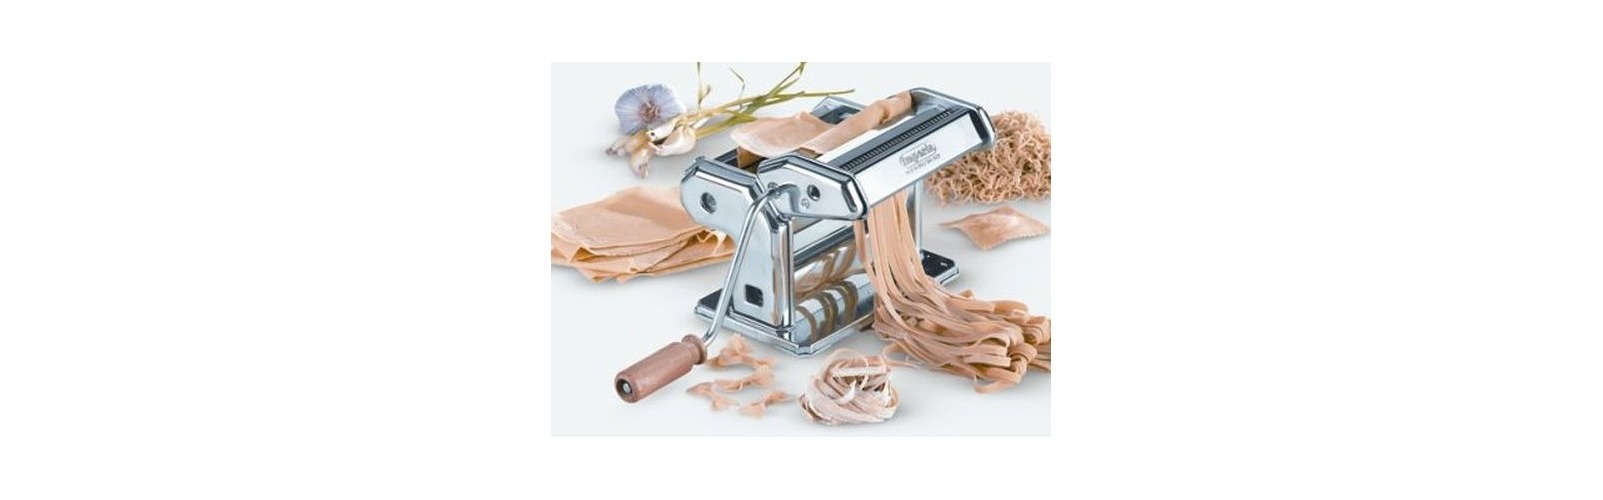 http://www.schospitality.co.nz/images/brands/45_10_Imperia%20Pasta%20Machine%20Lifestyle.jpg